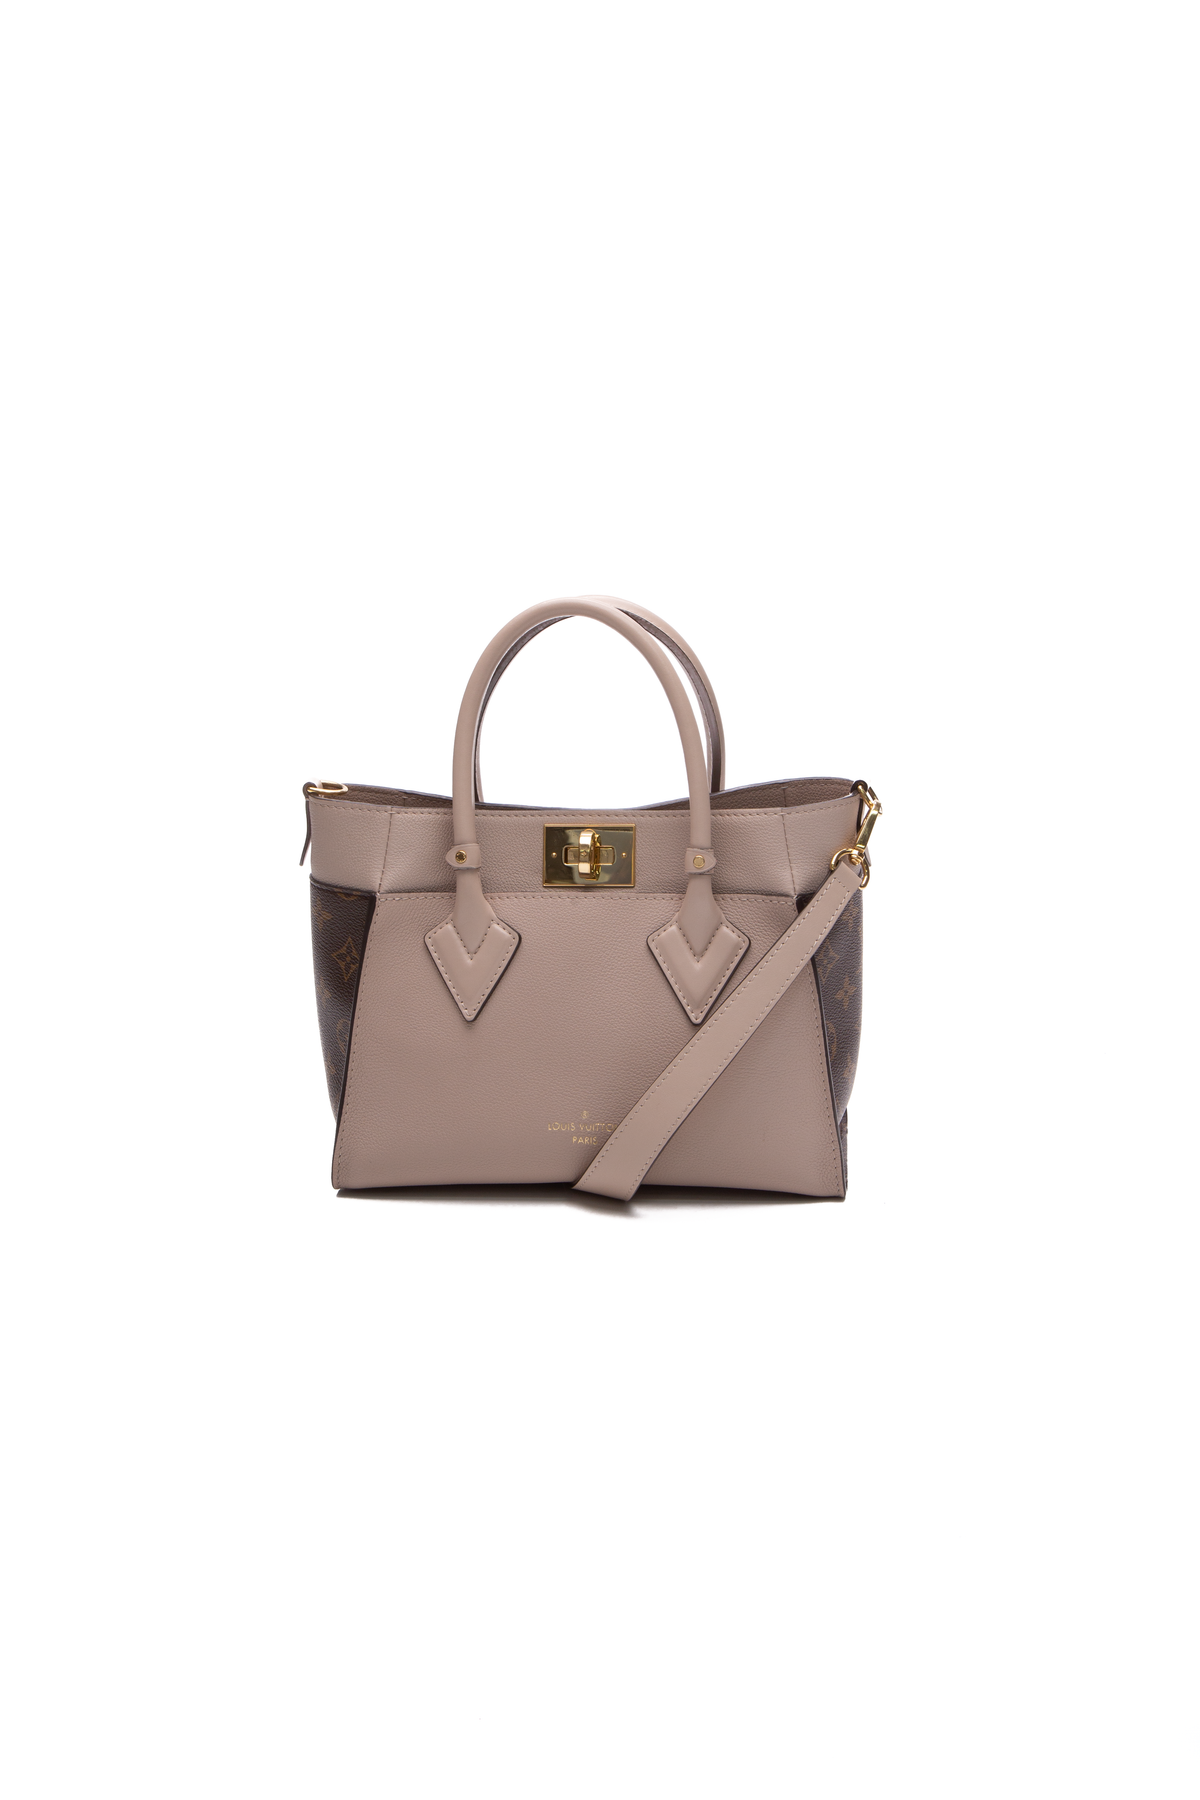 On My Side PM High End Leathers - Handbags